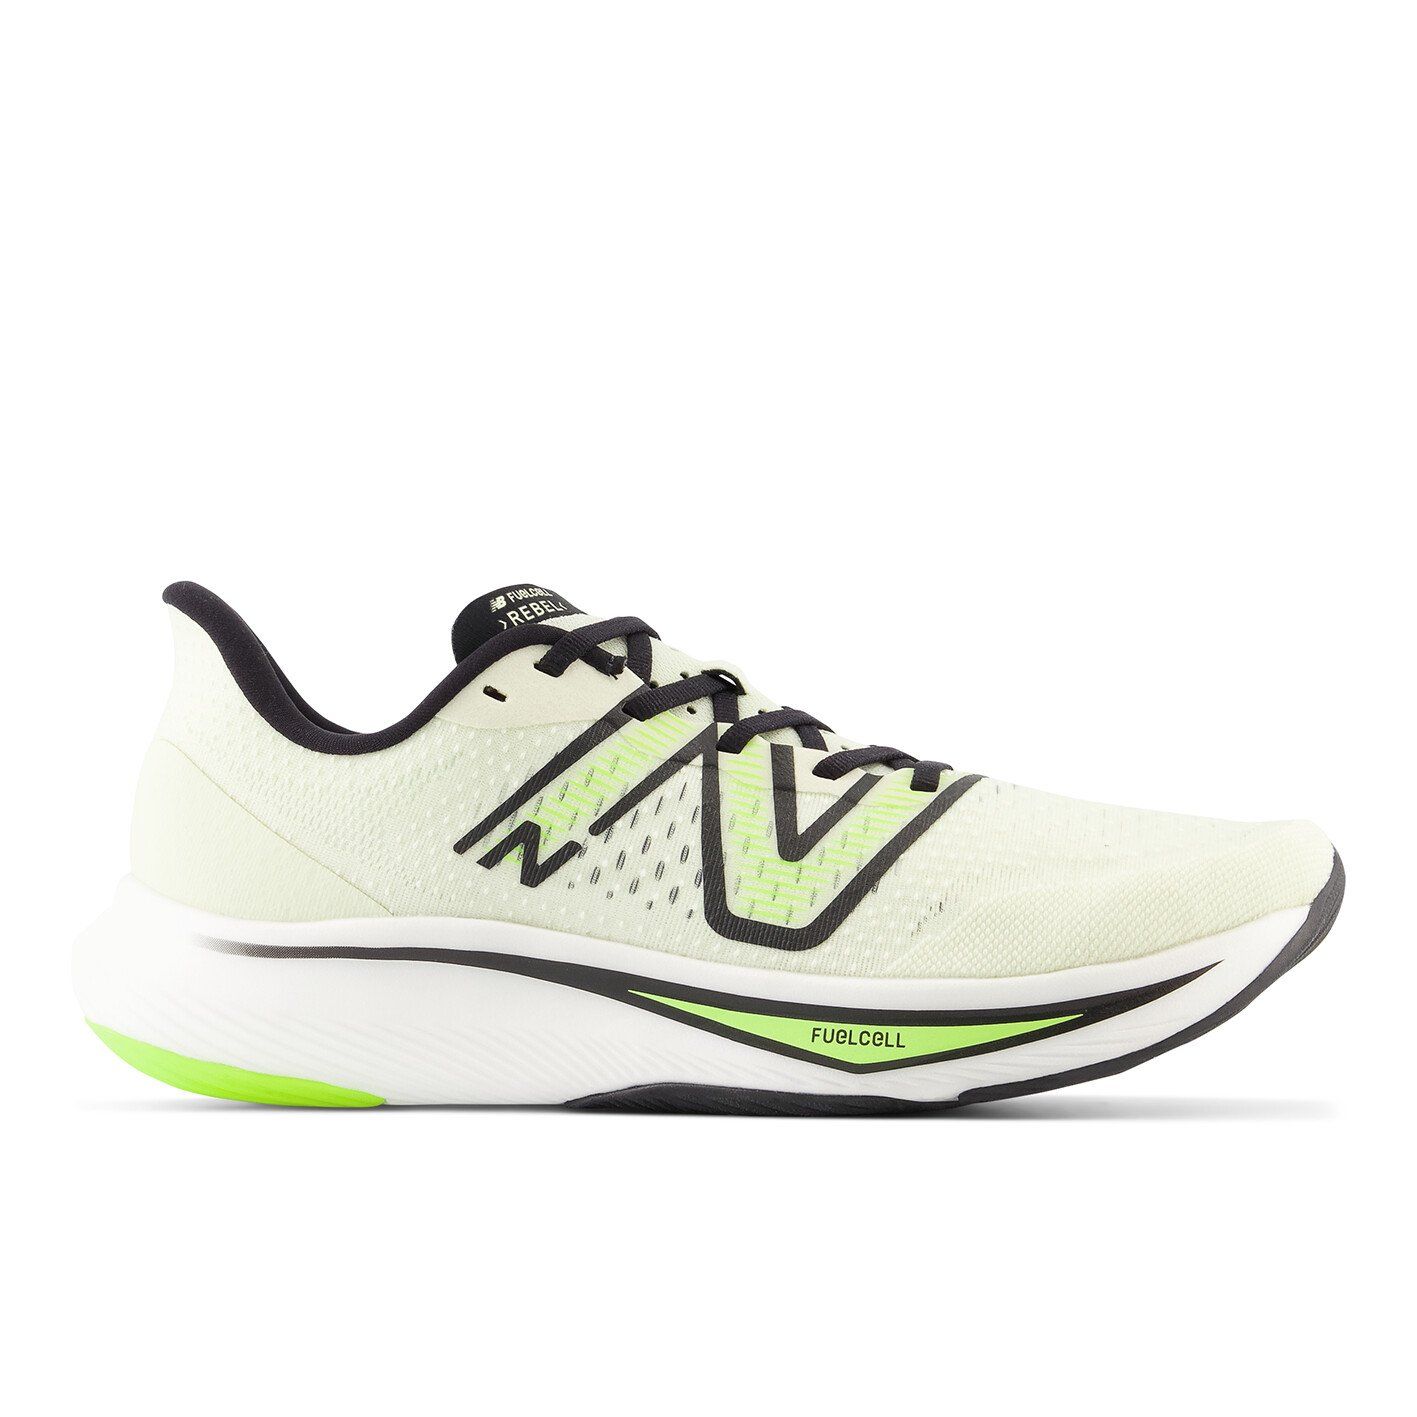 New Balance - MFCXCT3 Fuel Cell Rebel v3